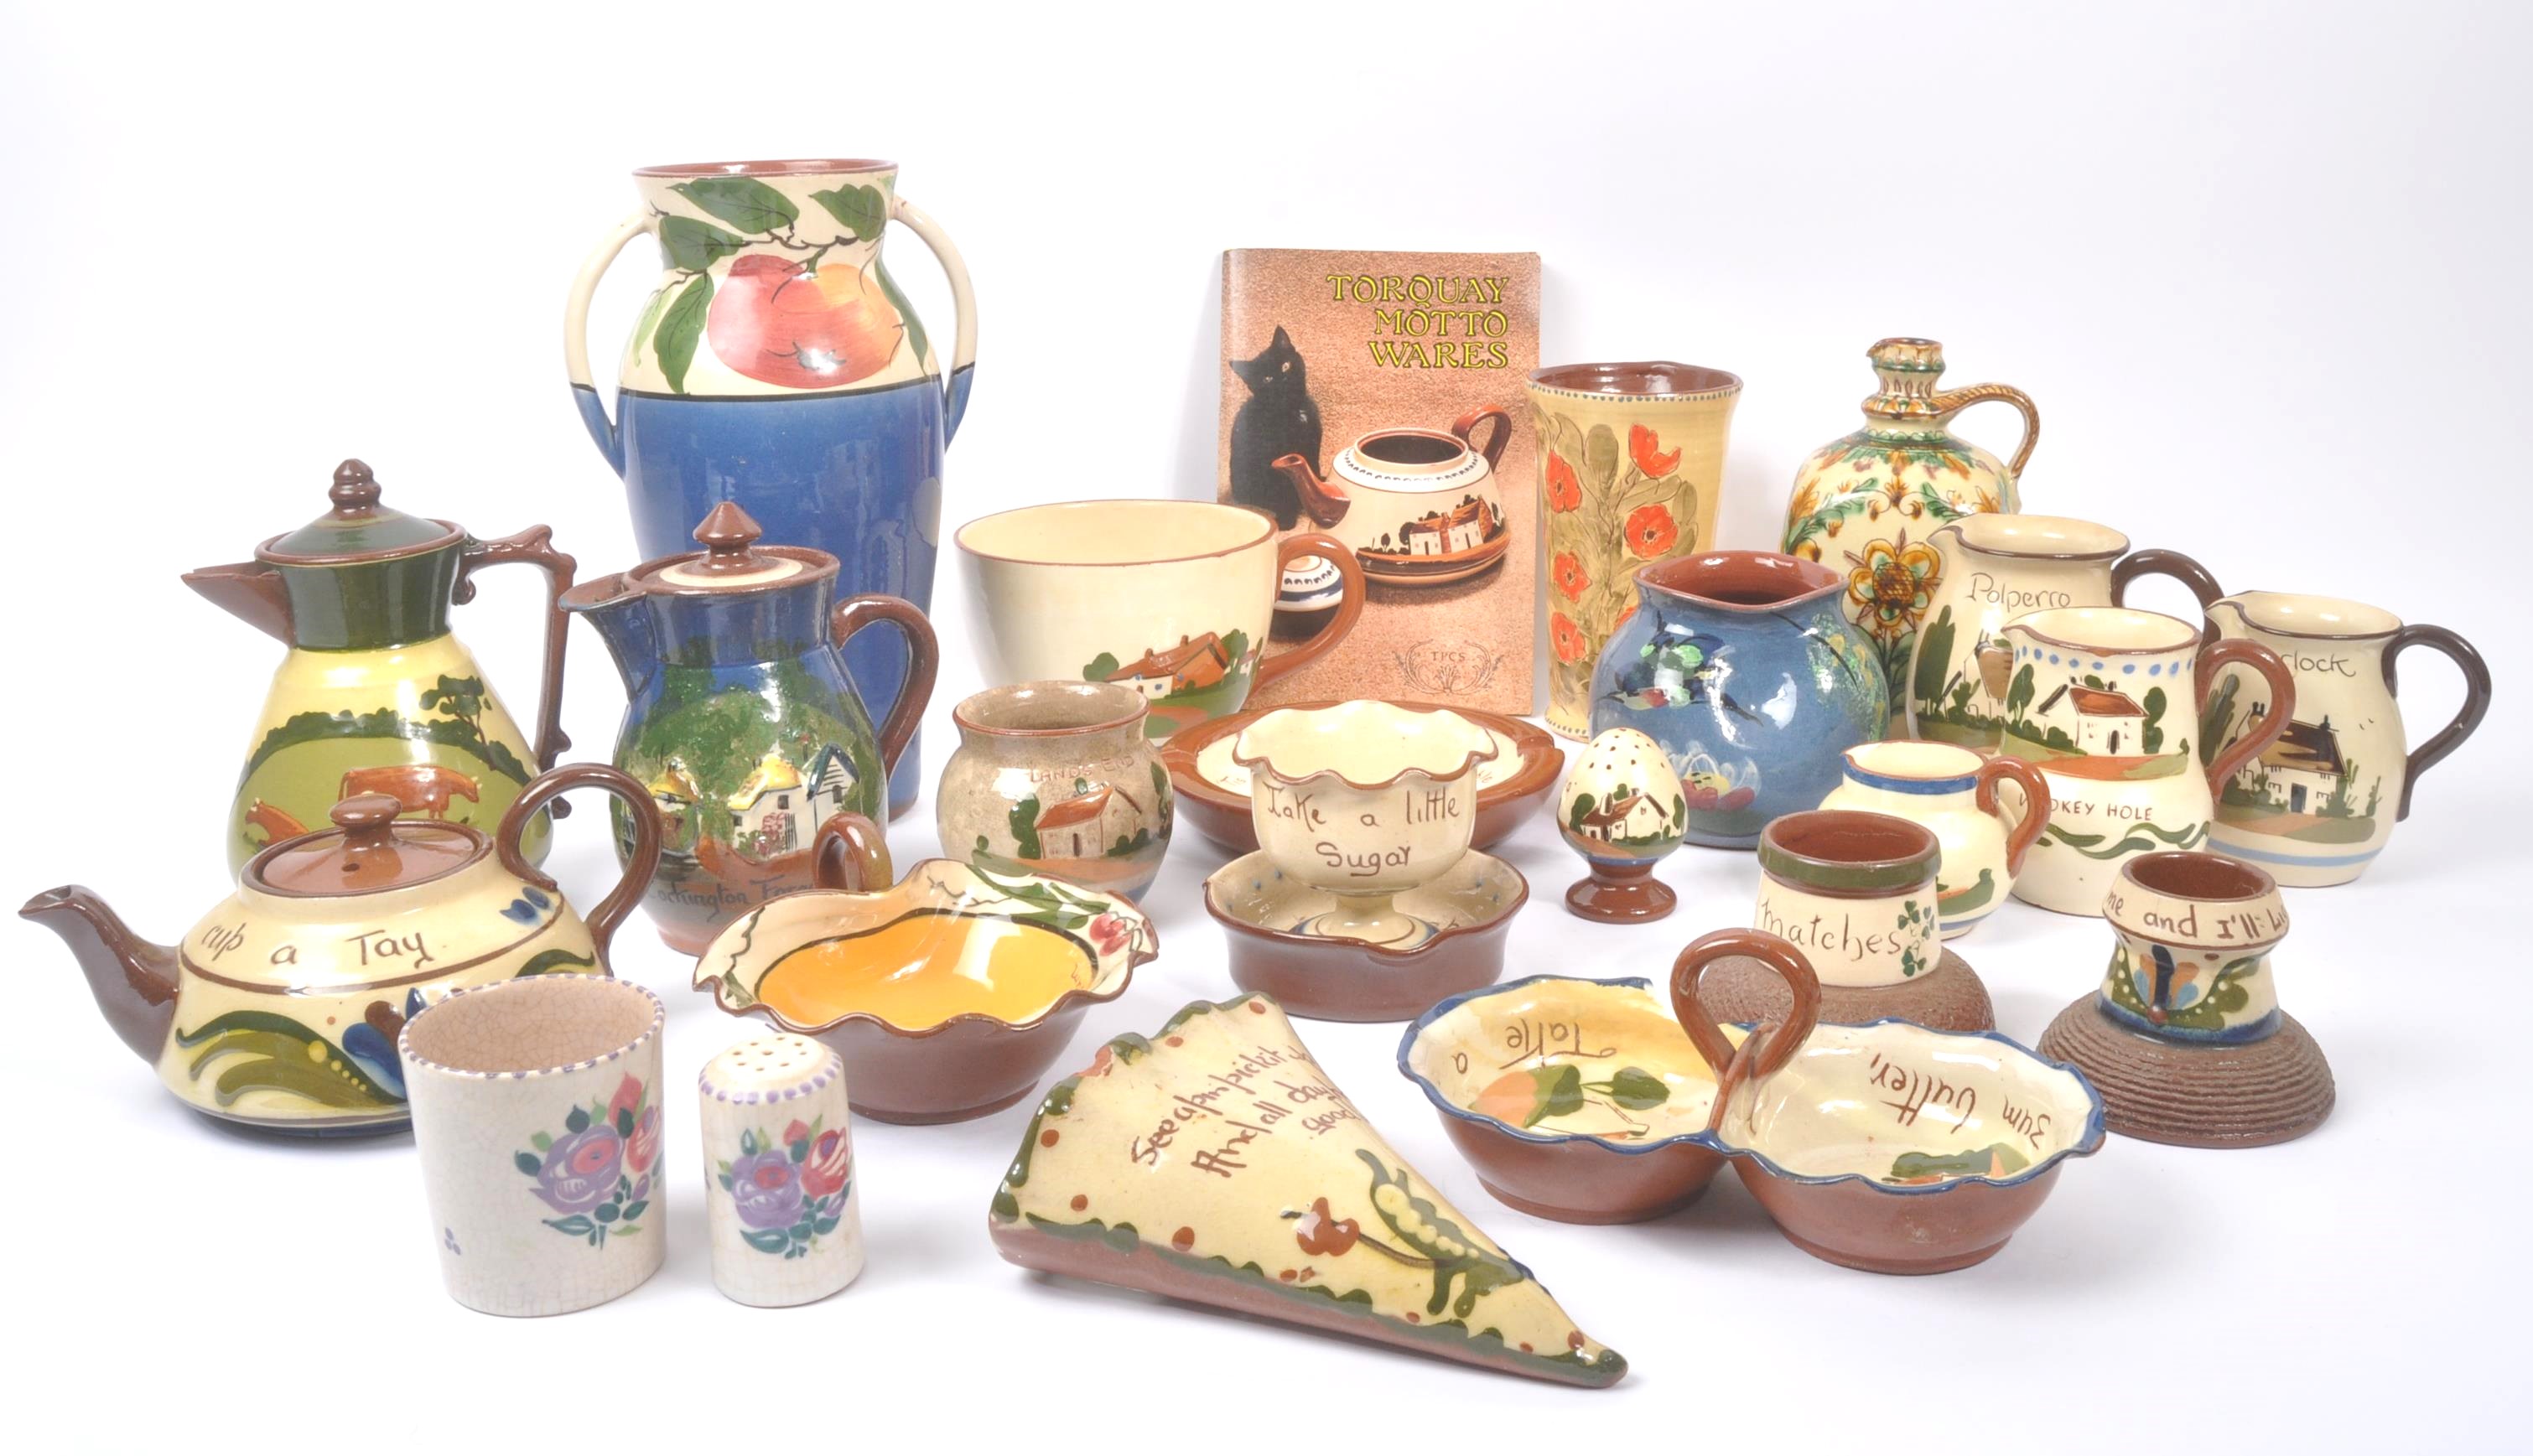 TORQUAY POTTERY / MOTTO WARES - COLLECTION OF CERAMIC